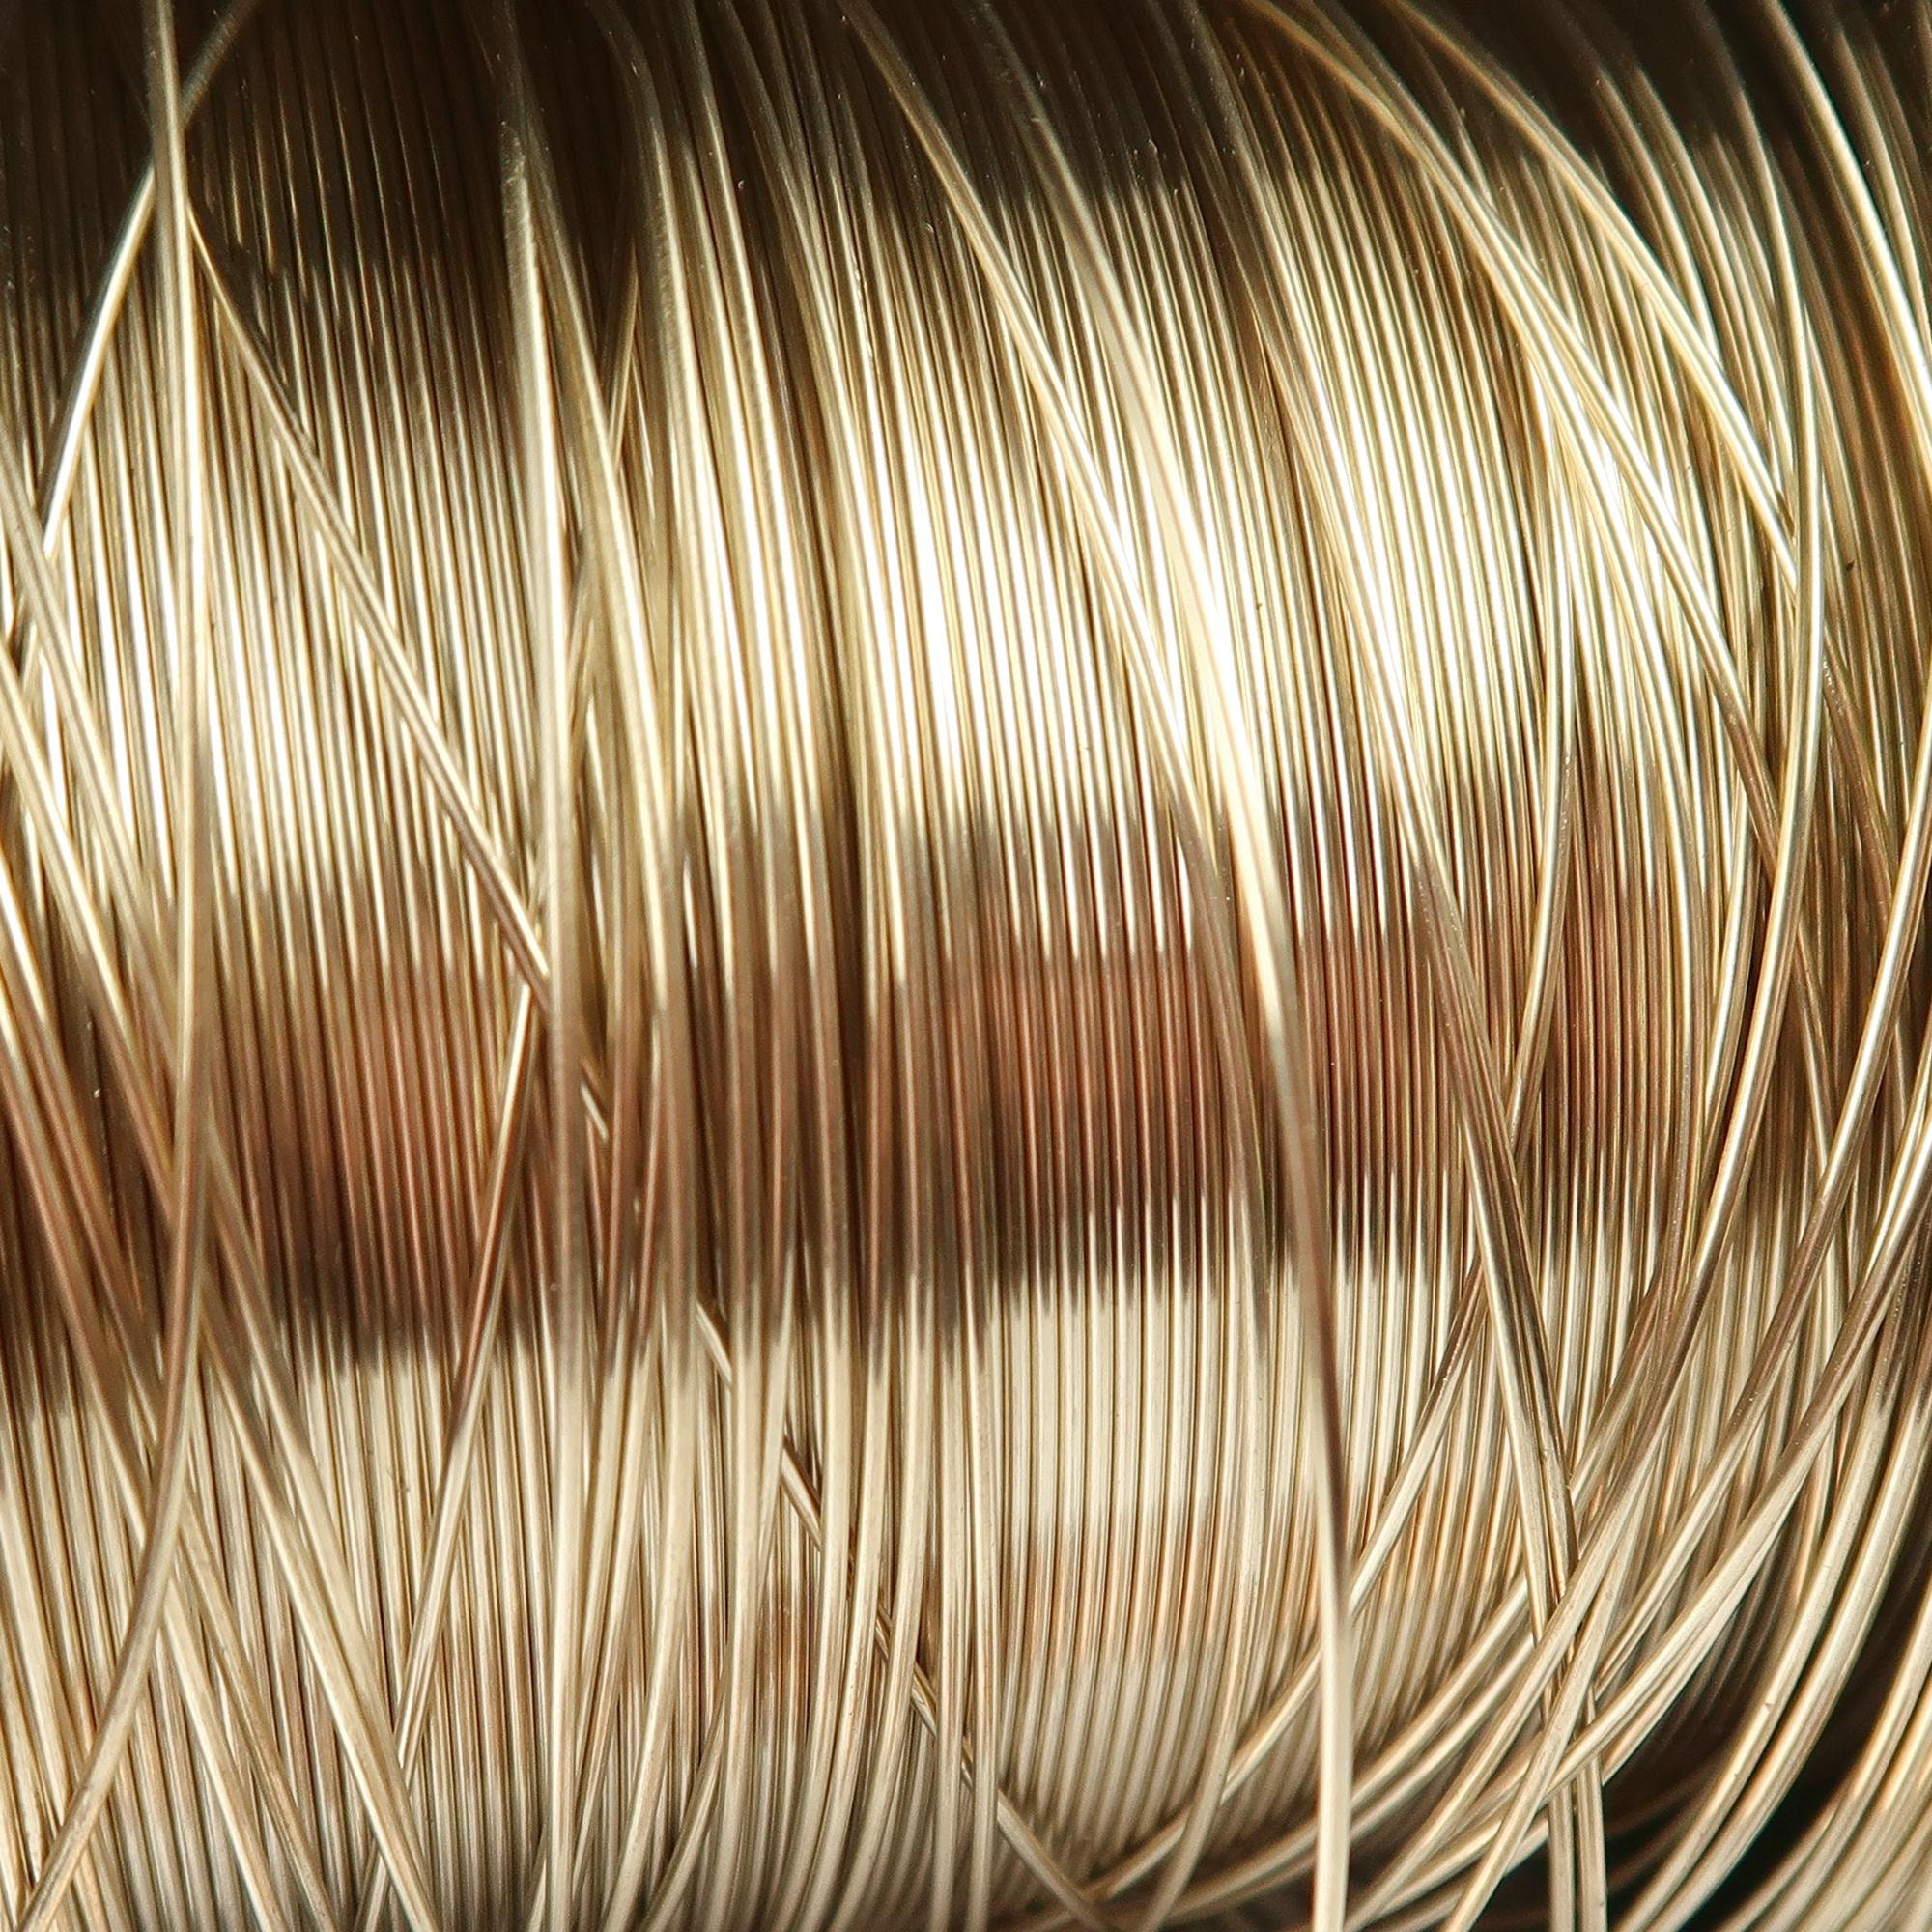 COPPER WIRE PURE Solid 14 Gauge 1 Lb Spool for Electroplating